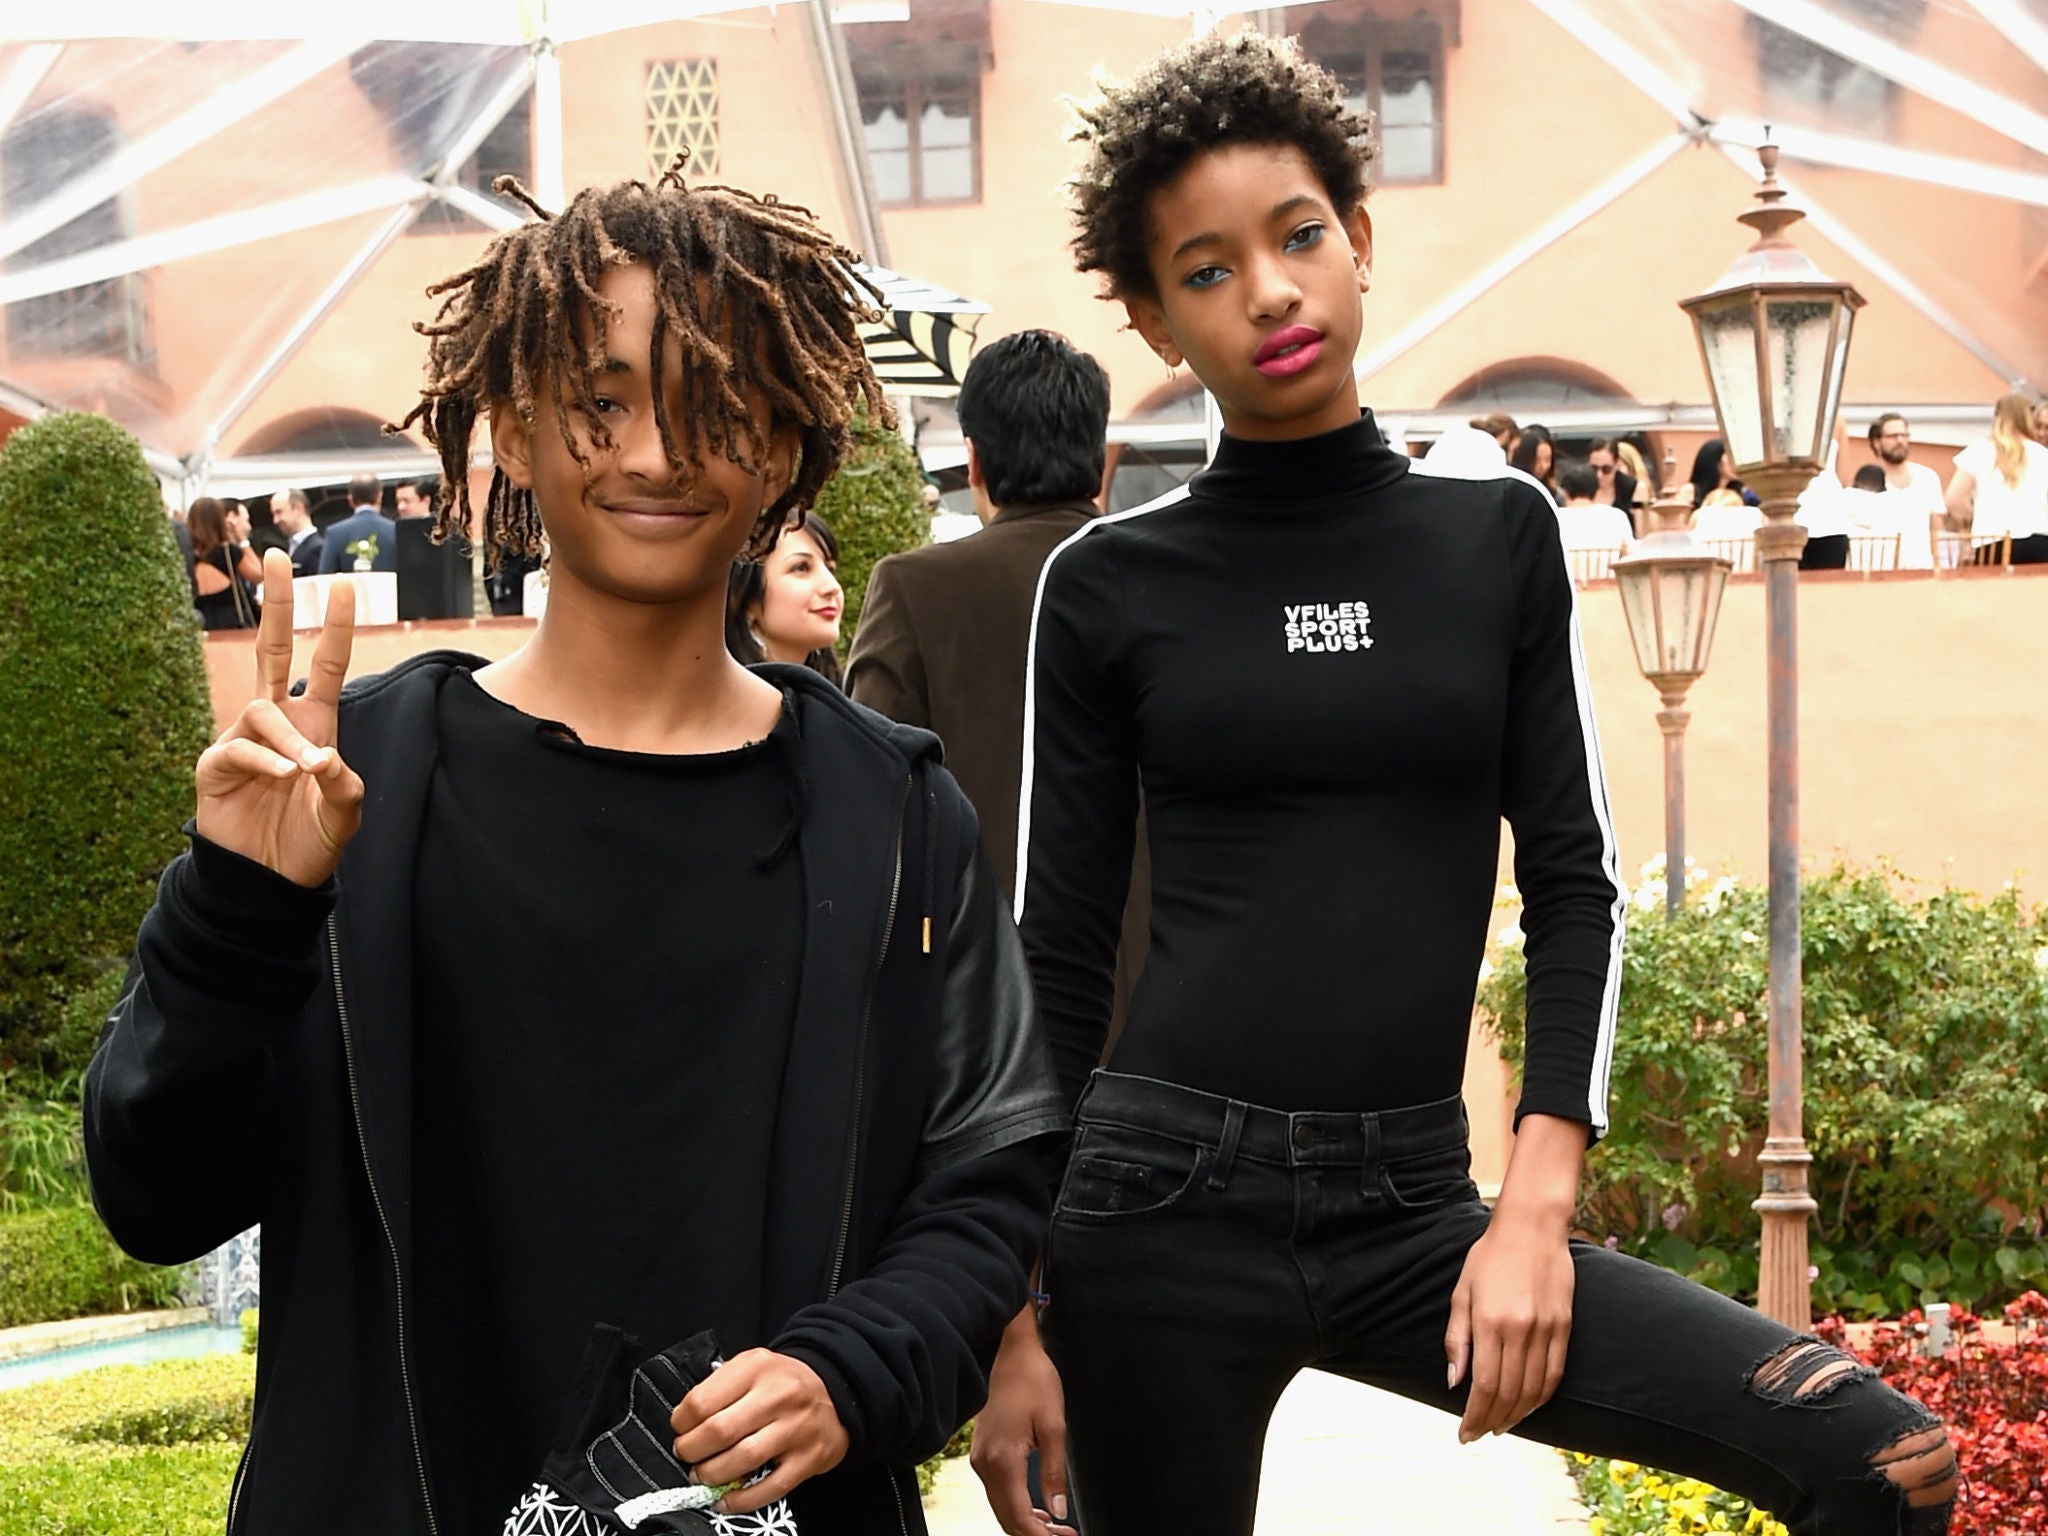 Jaden and Willow are the children of actors Will Smith and Jada Pinkett-Smith